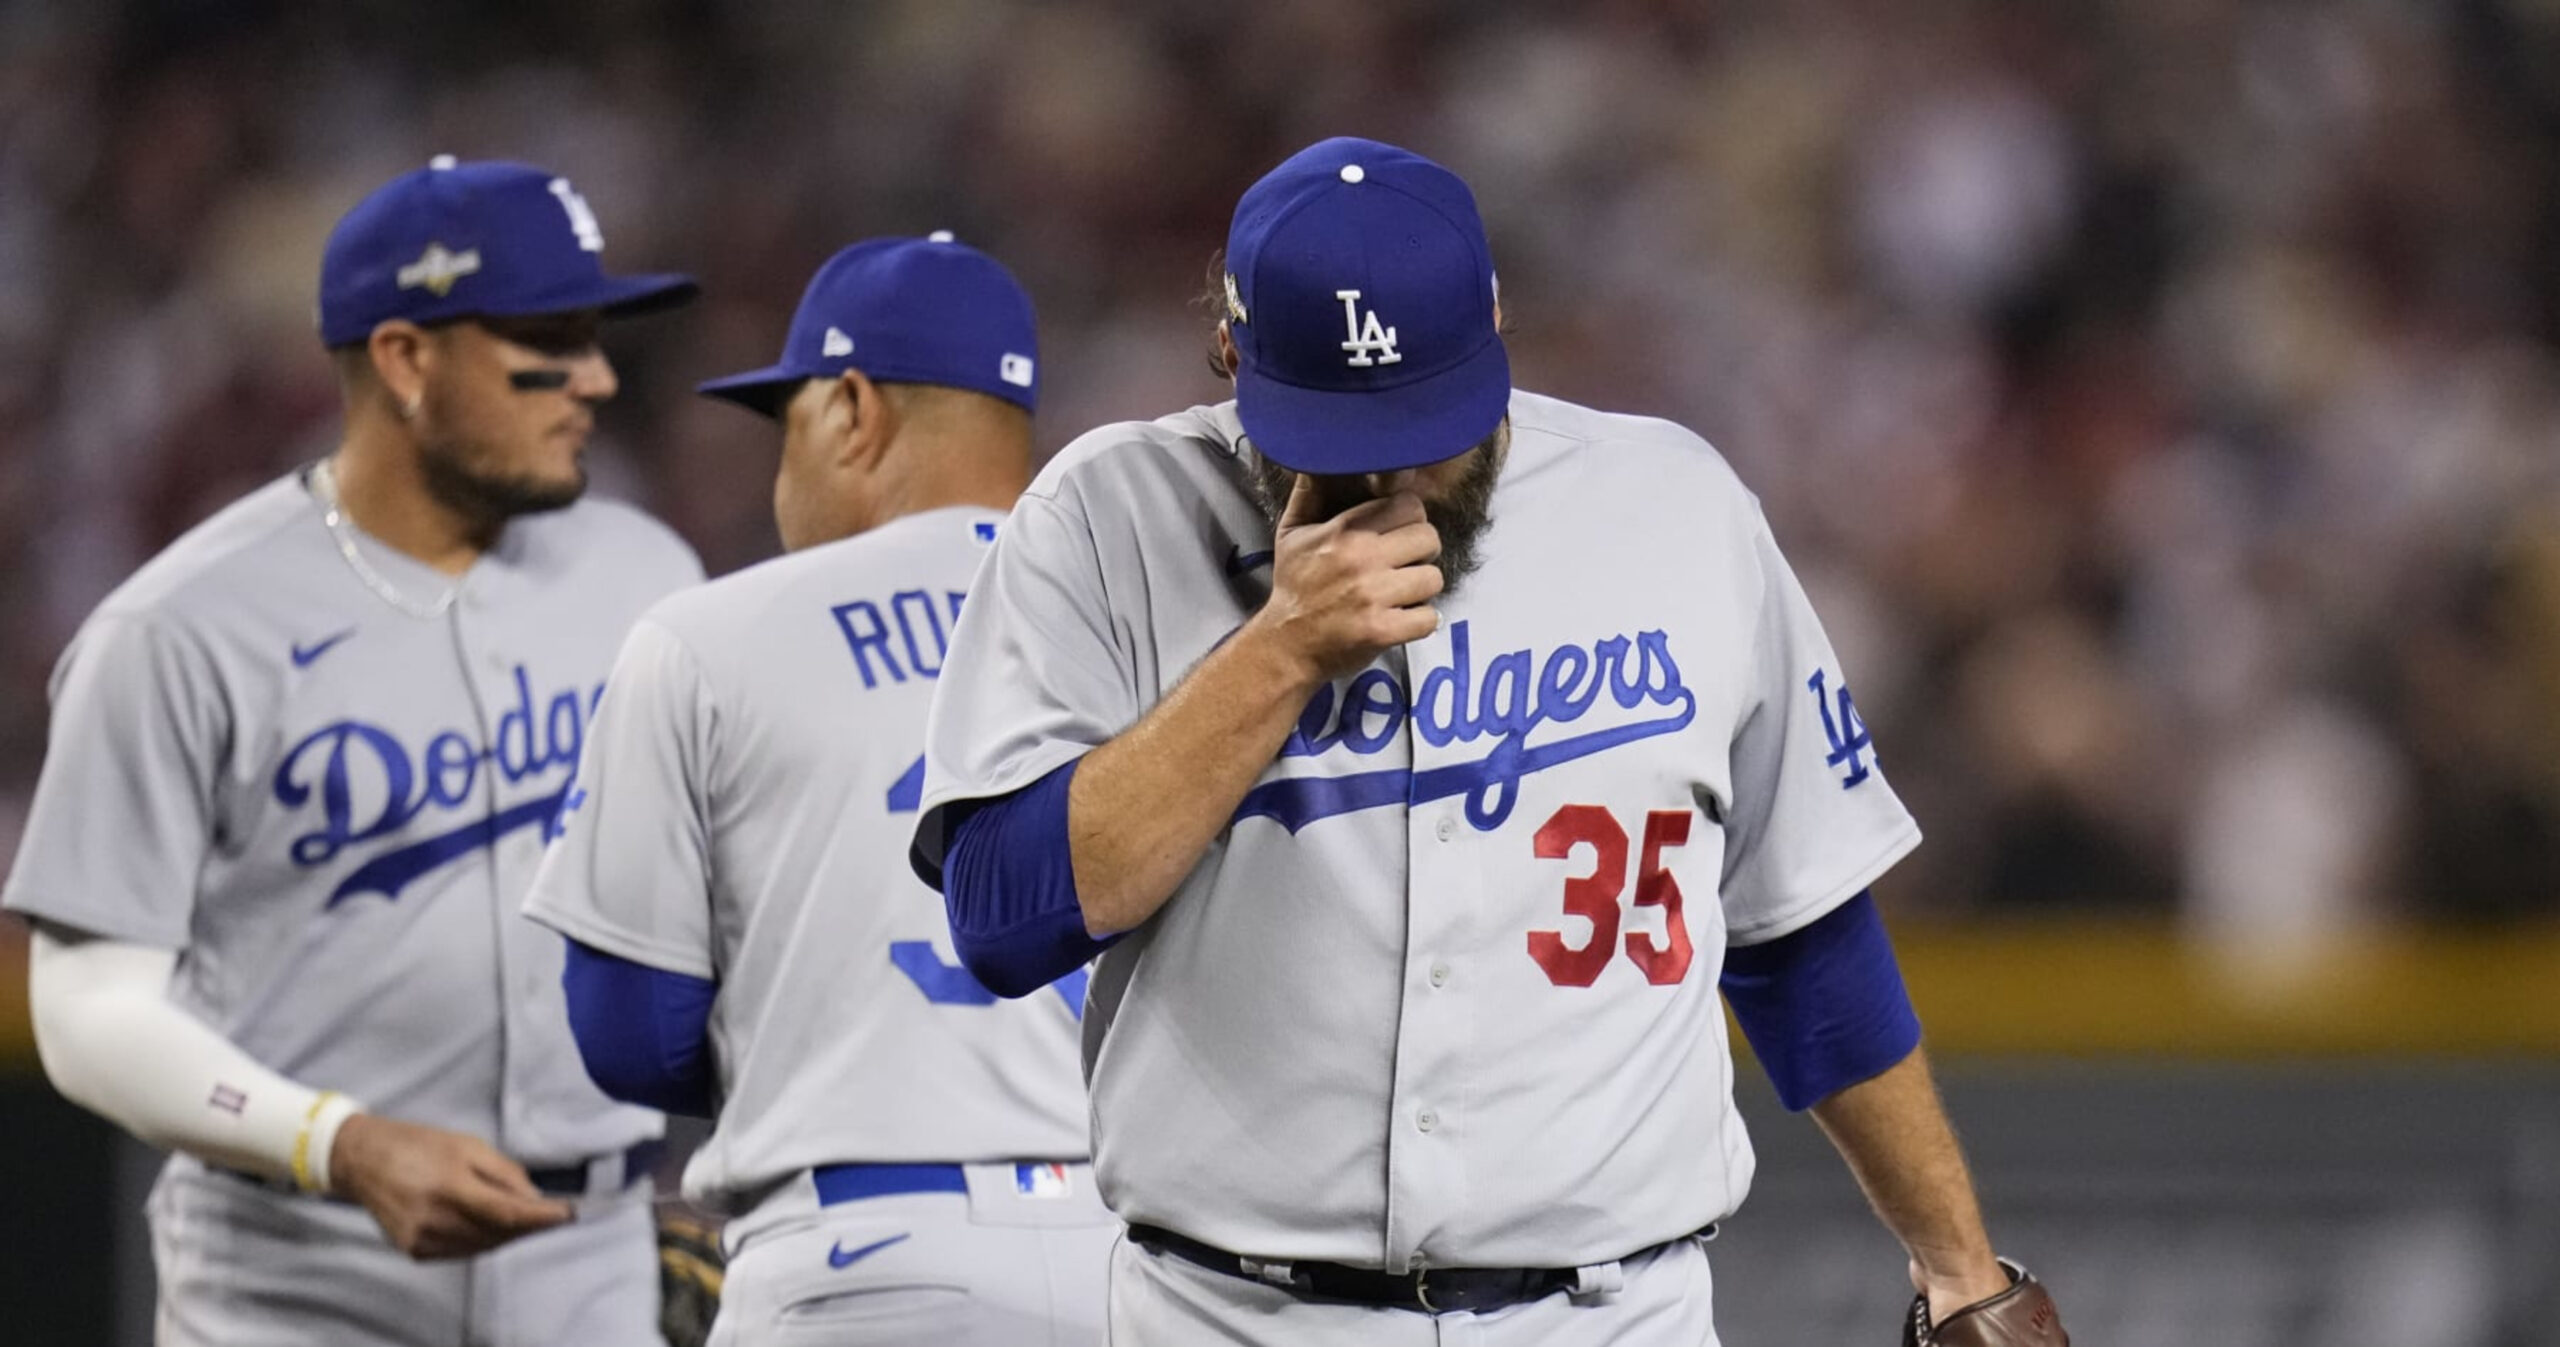 Dodgers Teetering on the Edge of Becoming 90’s Braves with Latest Playoff Flameout